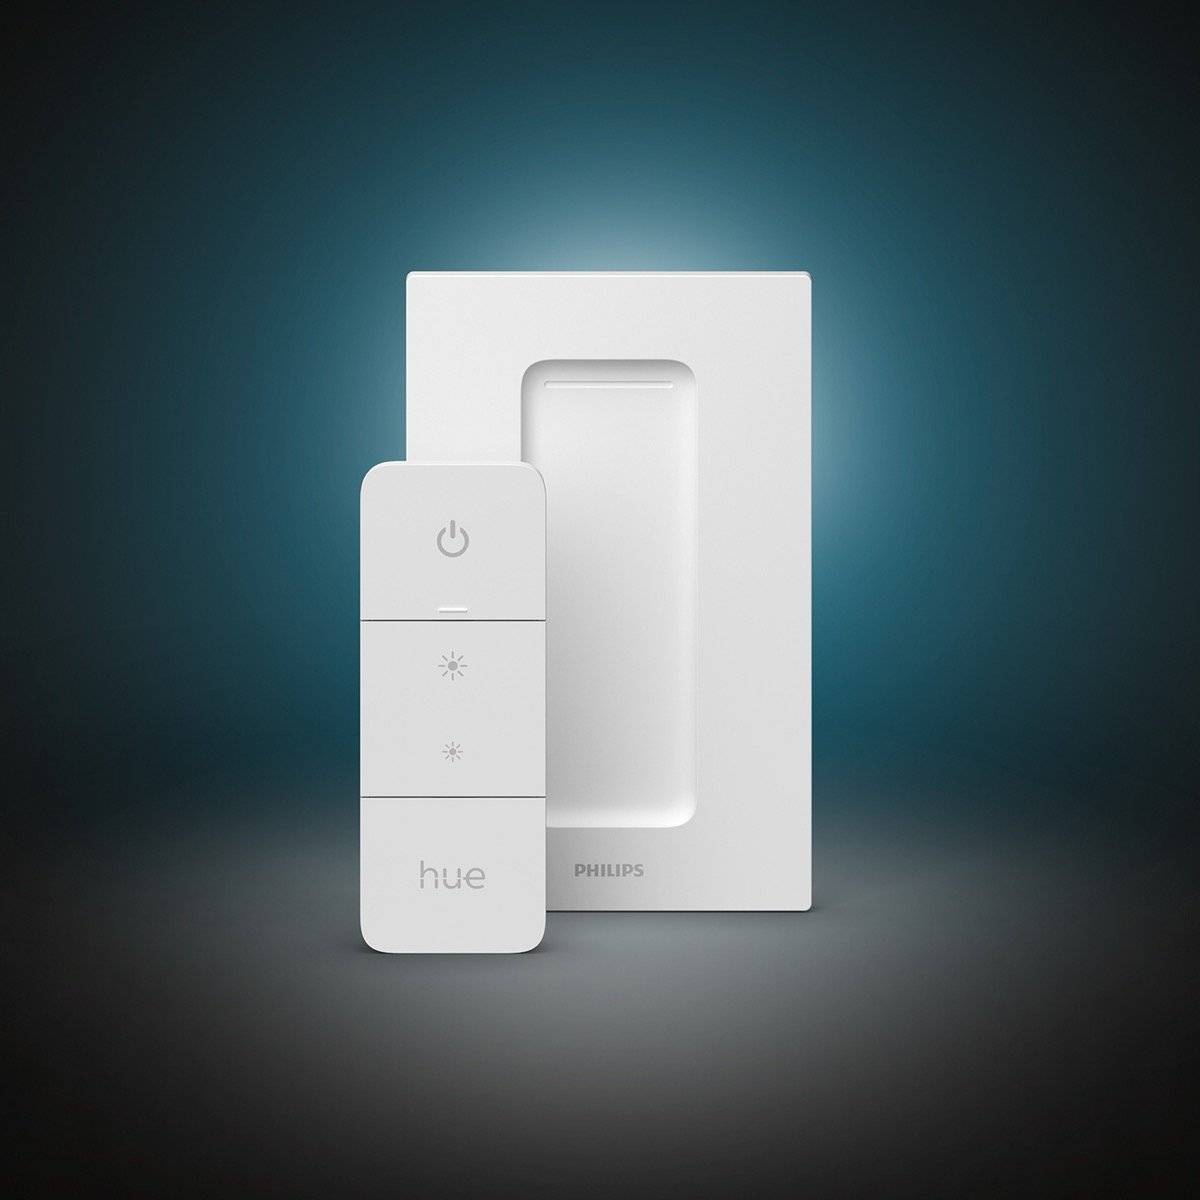 New-Philips-Hue-dimmer-switch-product-shot-dark